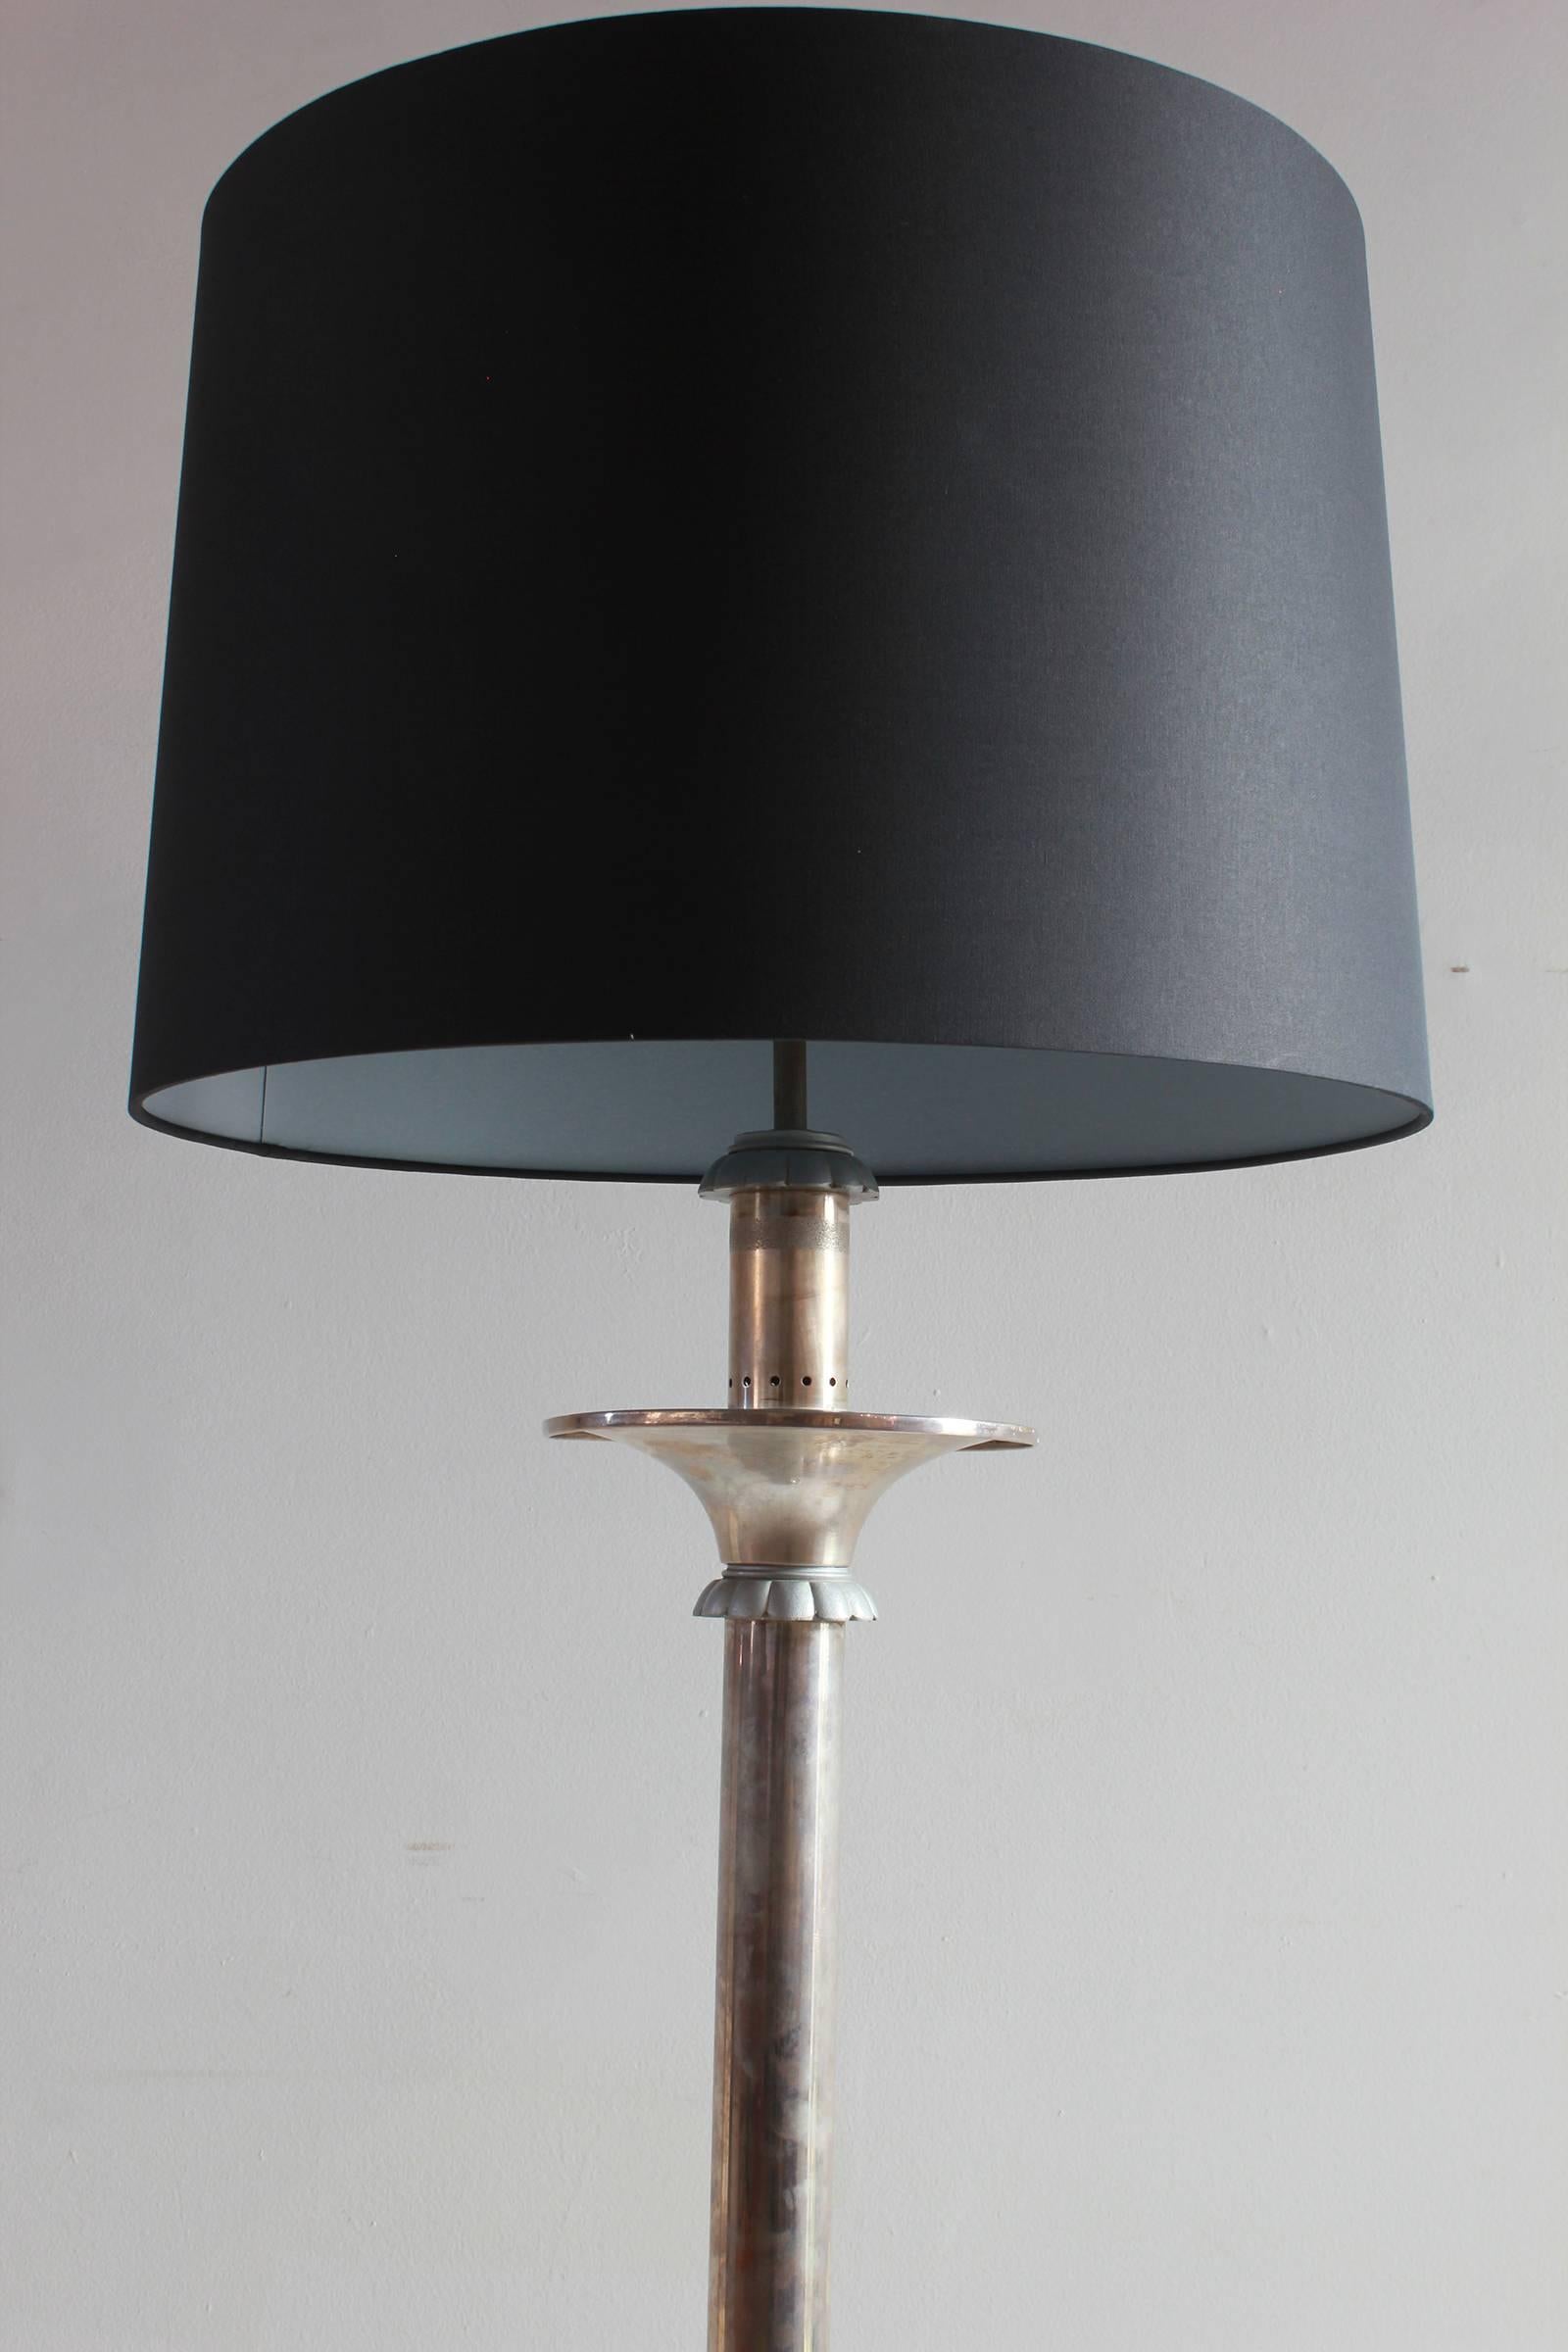 Italian nickel floor lamp with floral motif with a custom black book cloth lampshade.